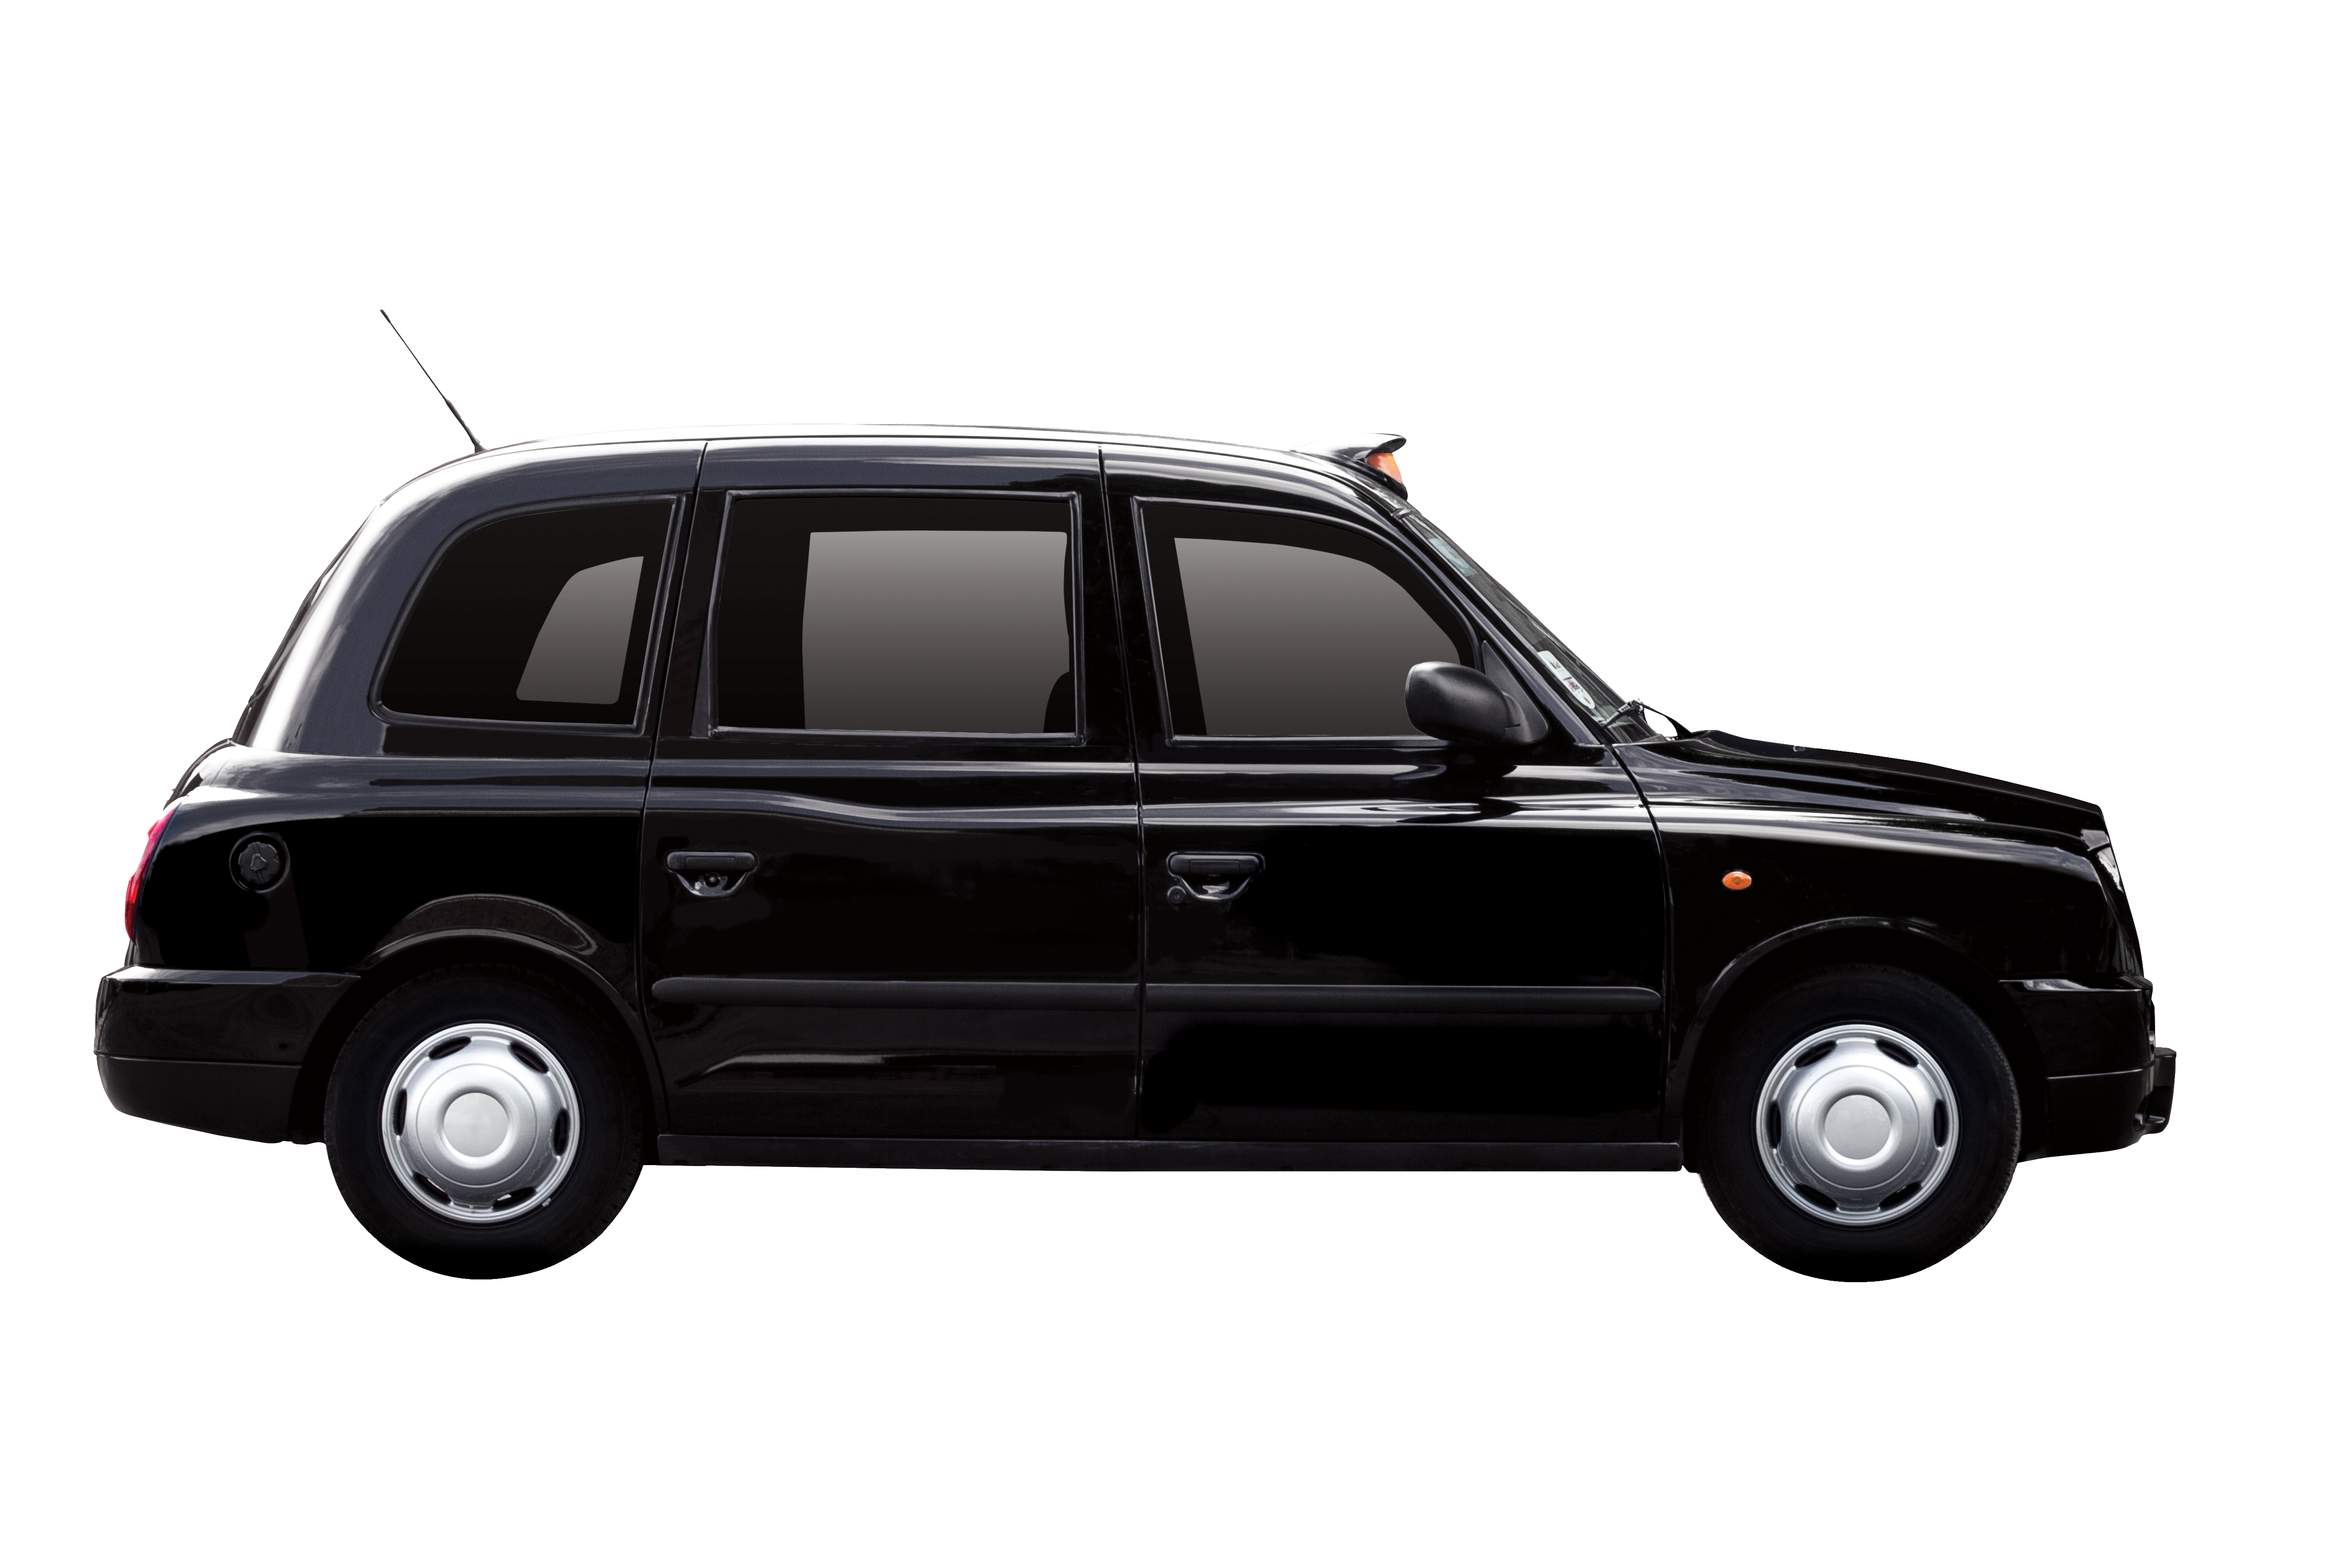 Black cabs to run on electric